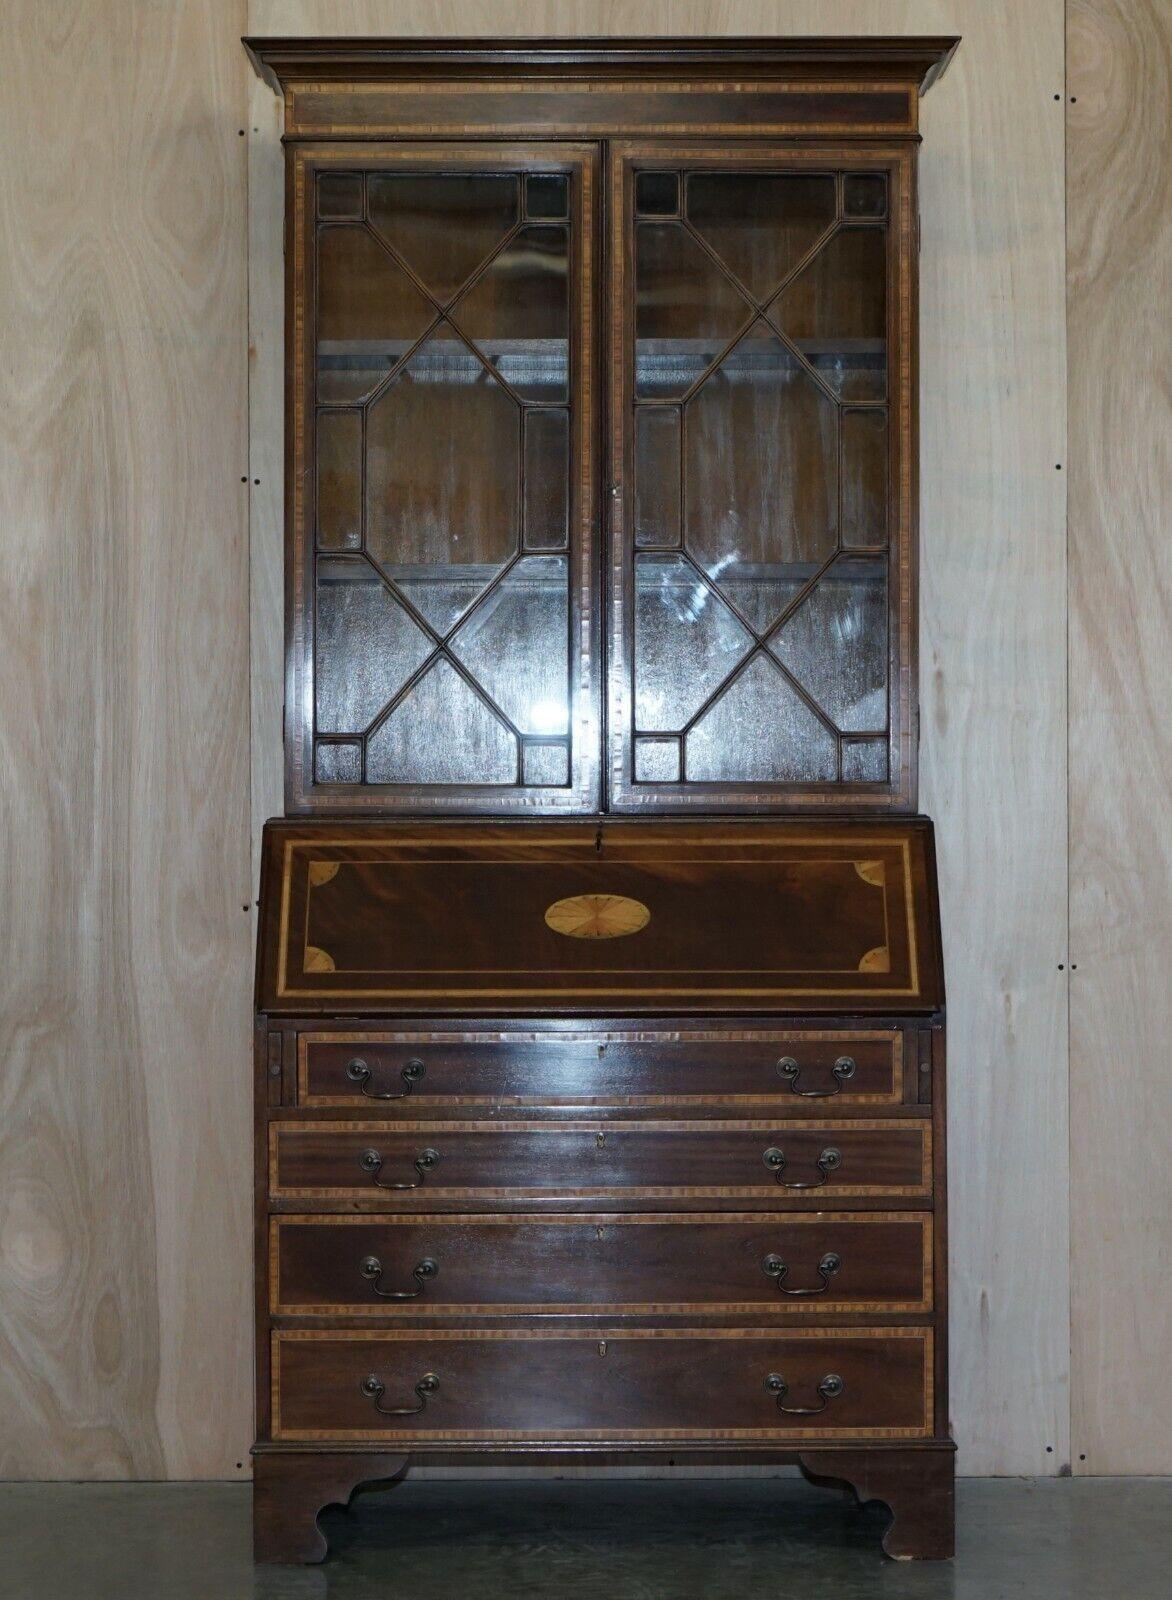 Royal House Antiques

Royal House Antiques is delighted to offer for sale this exquisite Sheraton Revival Walnut, Mahogany & Satinwood Bureau bookcase with brown leather drop front desk

Please note the delivery fee listed is just a guide, it covers